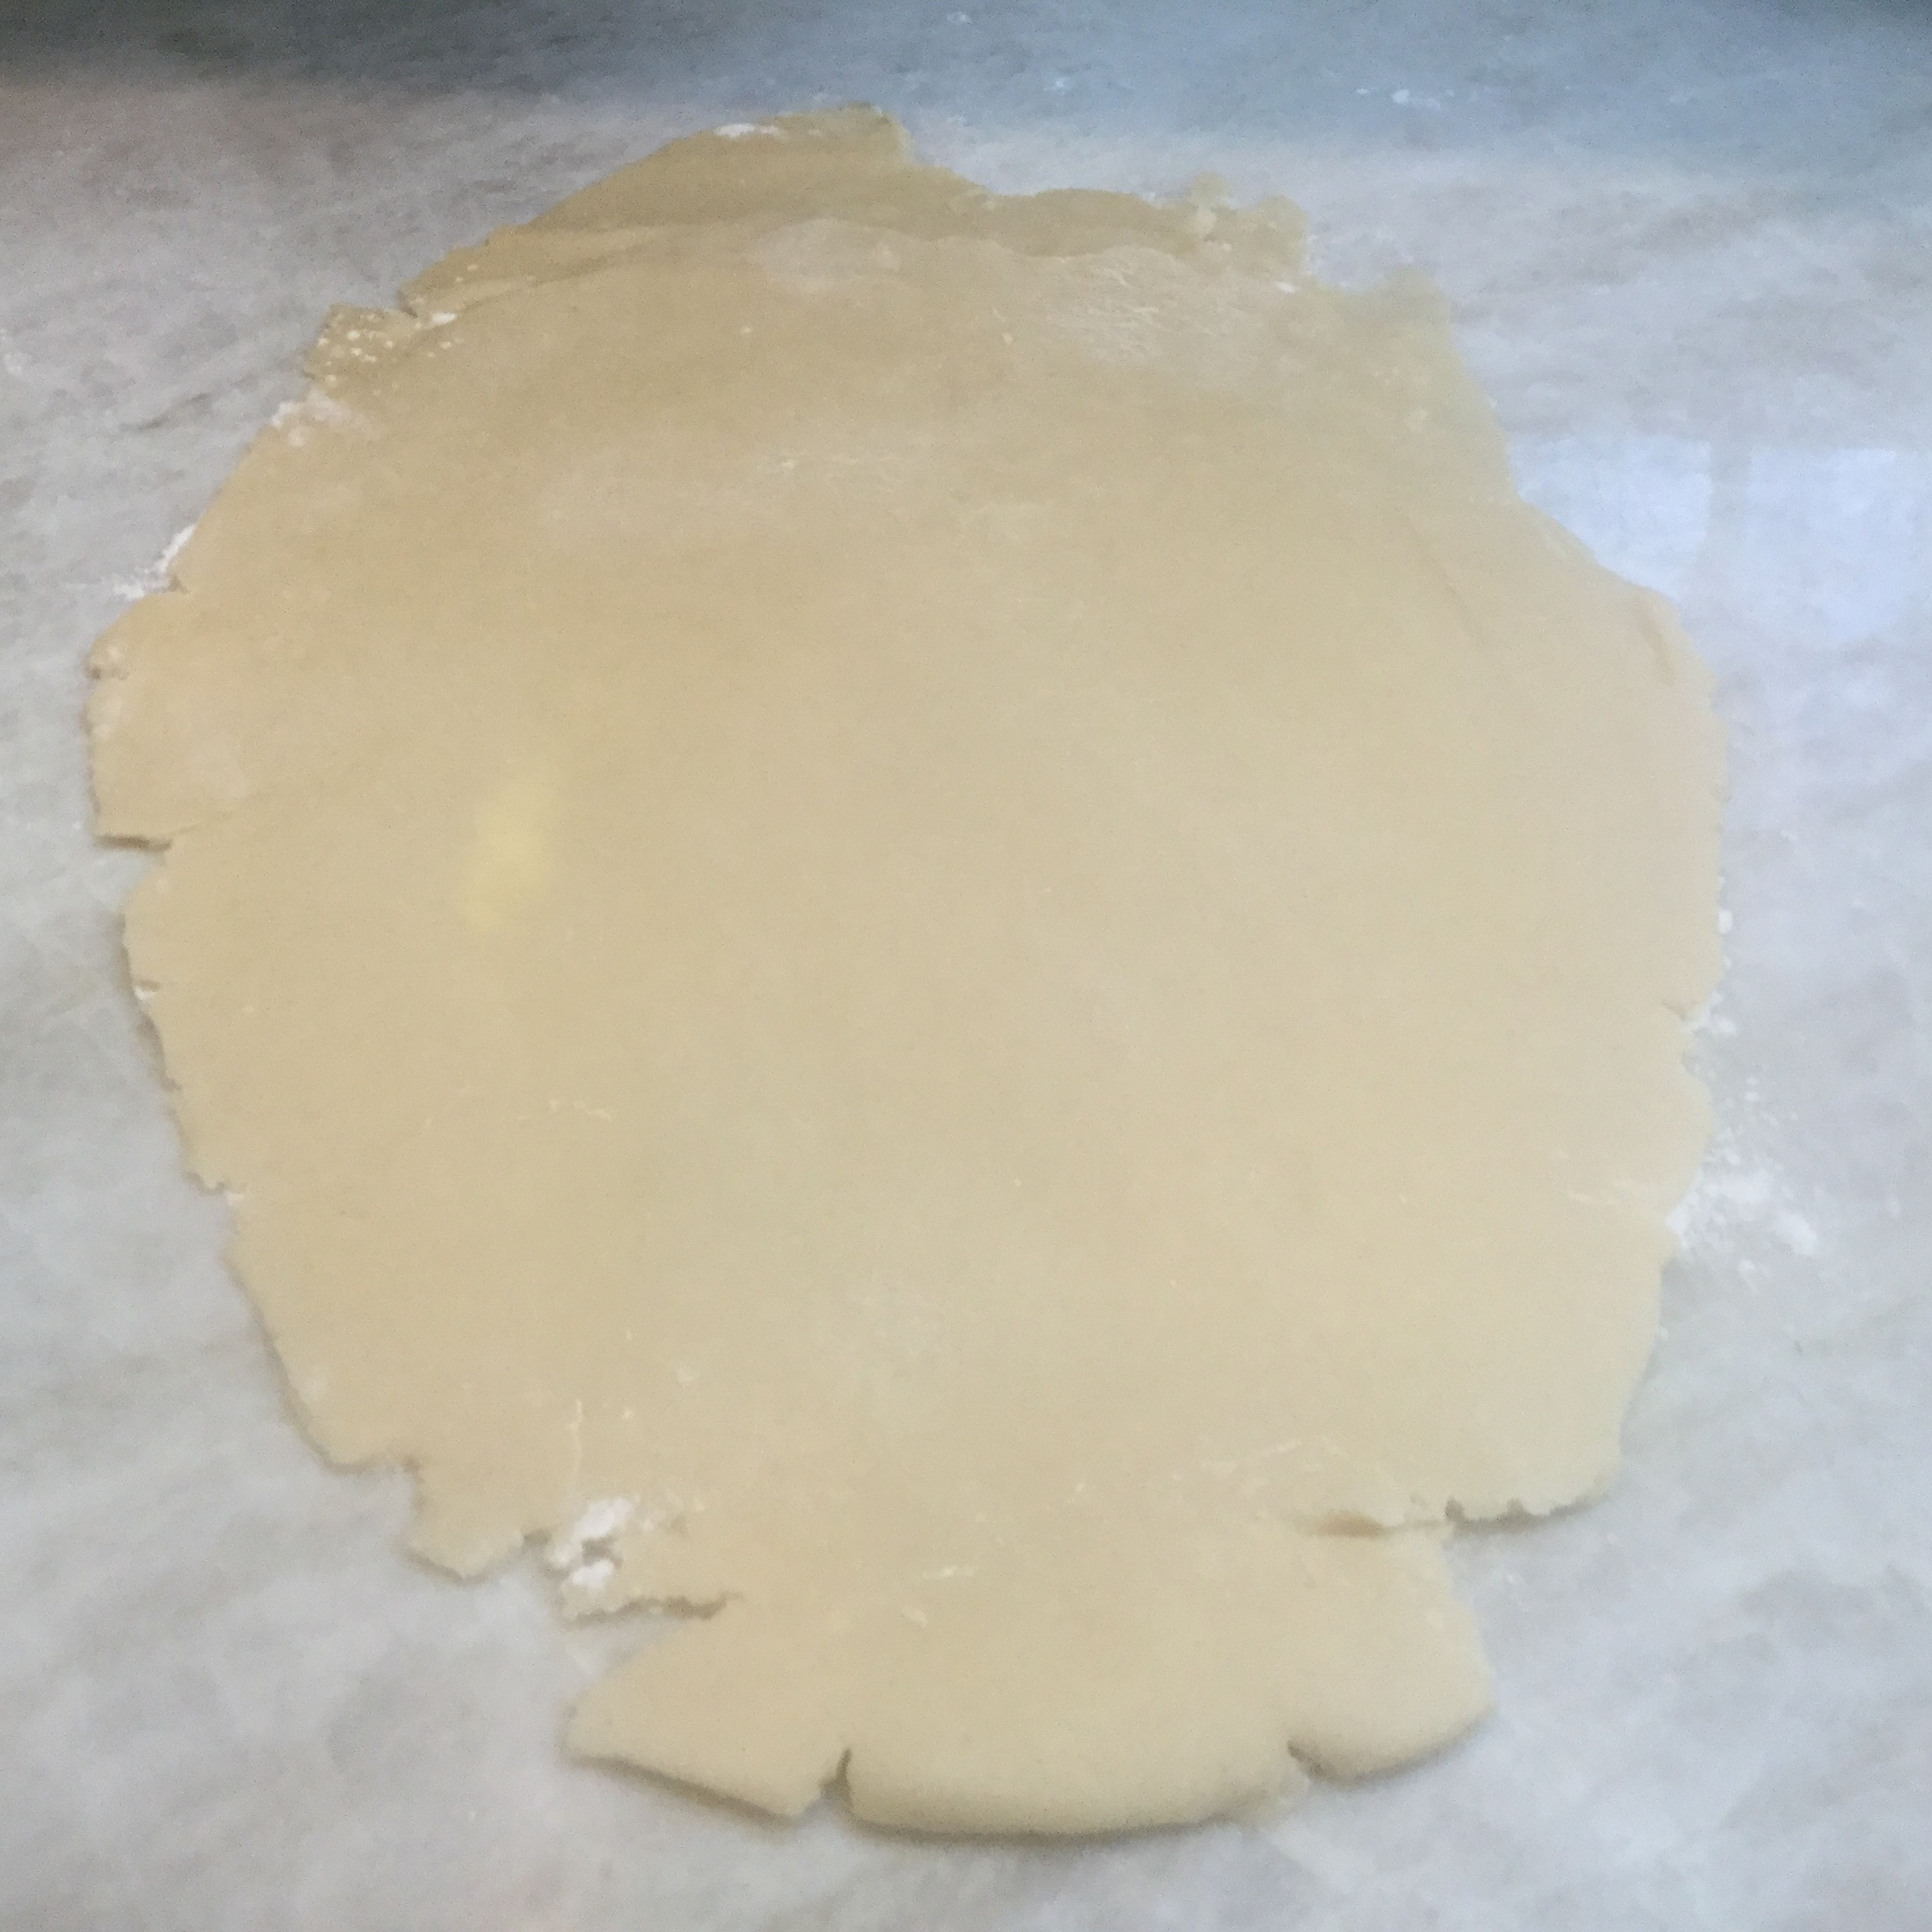 Take one half of the dough out. Sprinkle flour on the counter and roll the dough out. It should be a 1/4 inch thick.